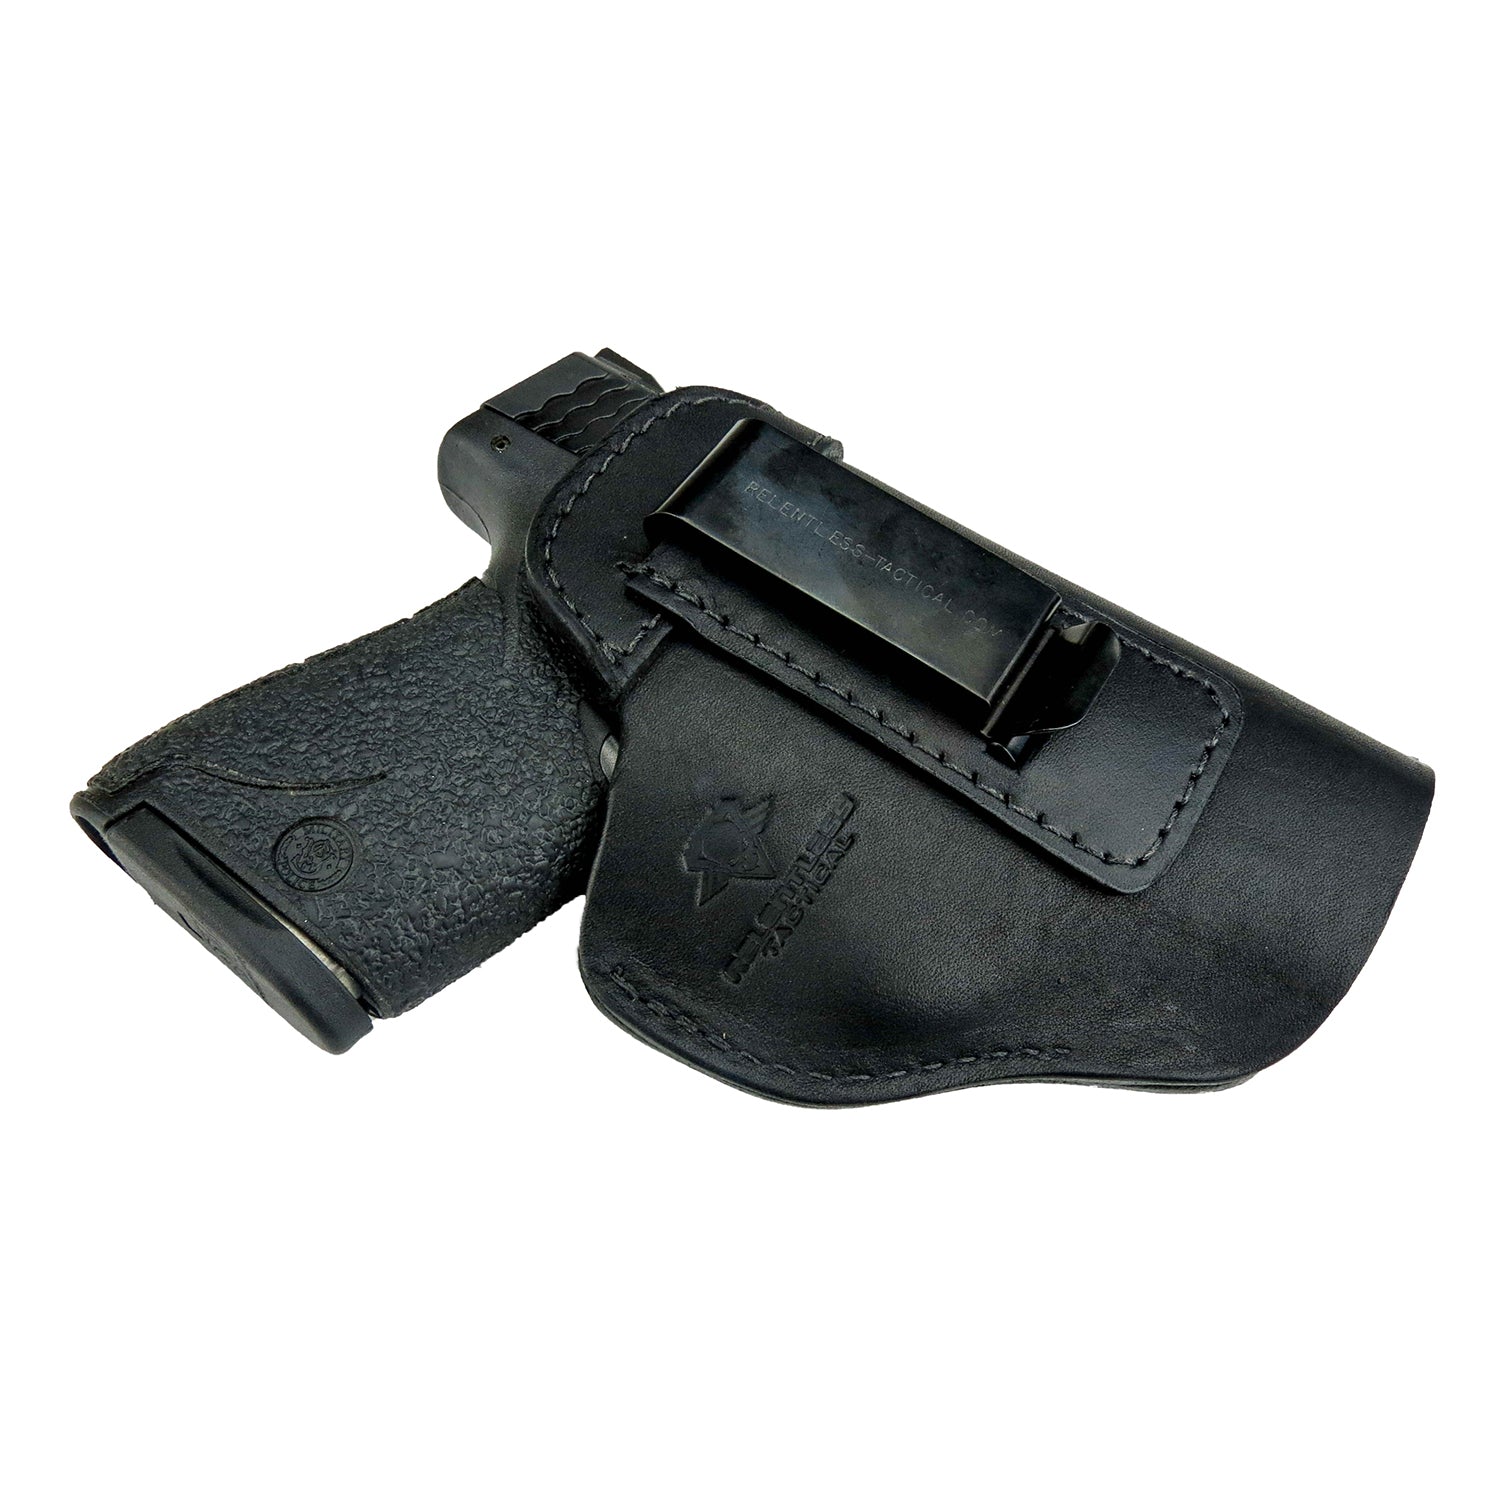 Relentless Tactical Ultimate Leather Holster 2 Slot OWB | Made in USA for Glock 17 19 22 26 32 33 / S&W M&P Shield / Springfield XD & XDS / Plus All